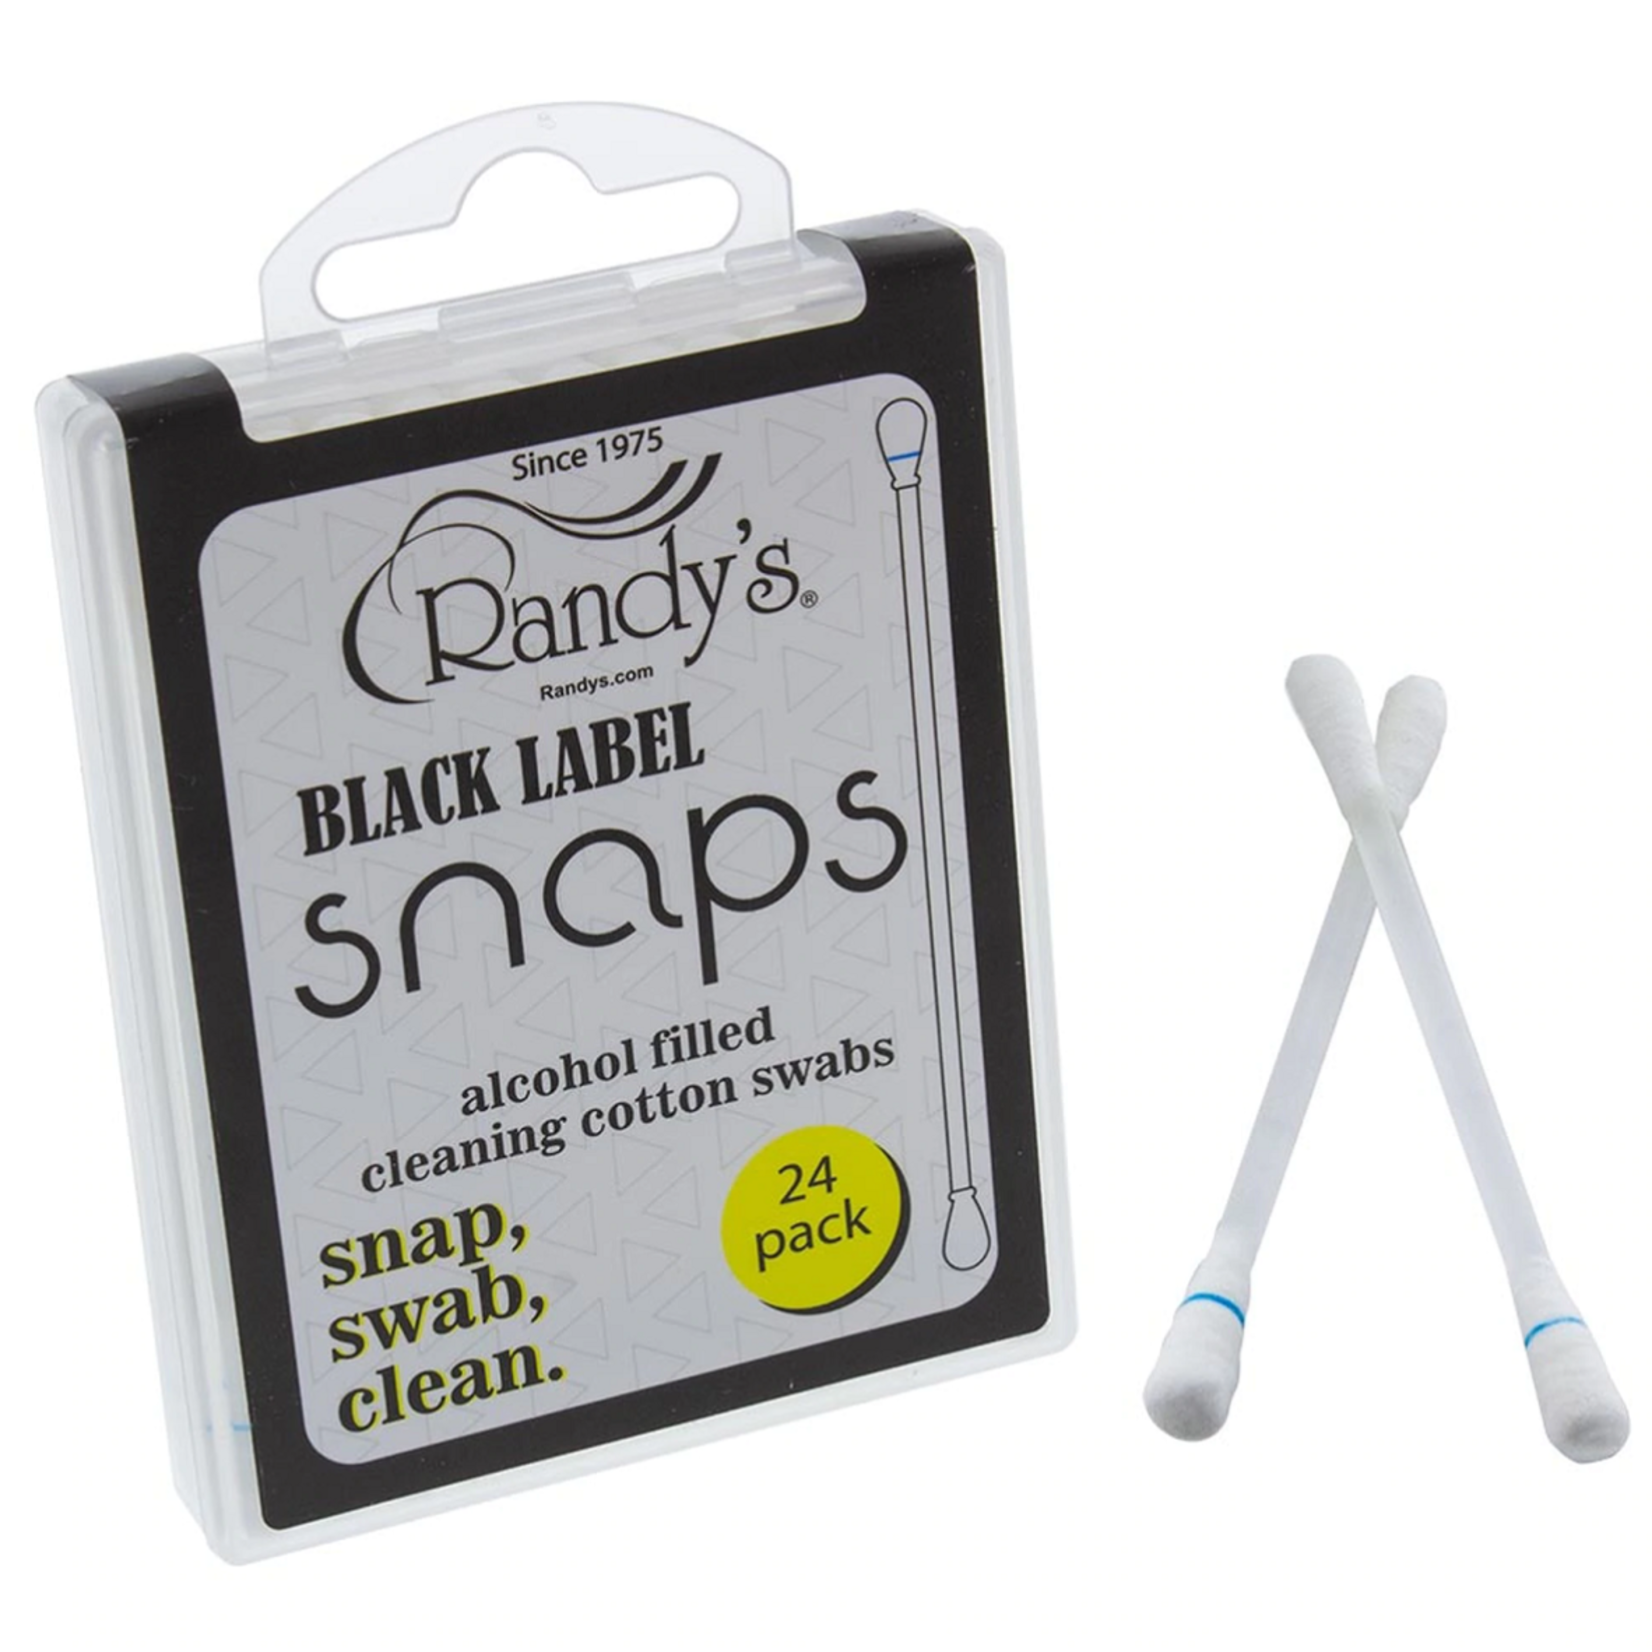 Randy's Randy's Black Label Snaps: Alcohol Filled Cleaning Cotton Swabs - 24 pack